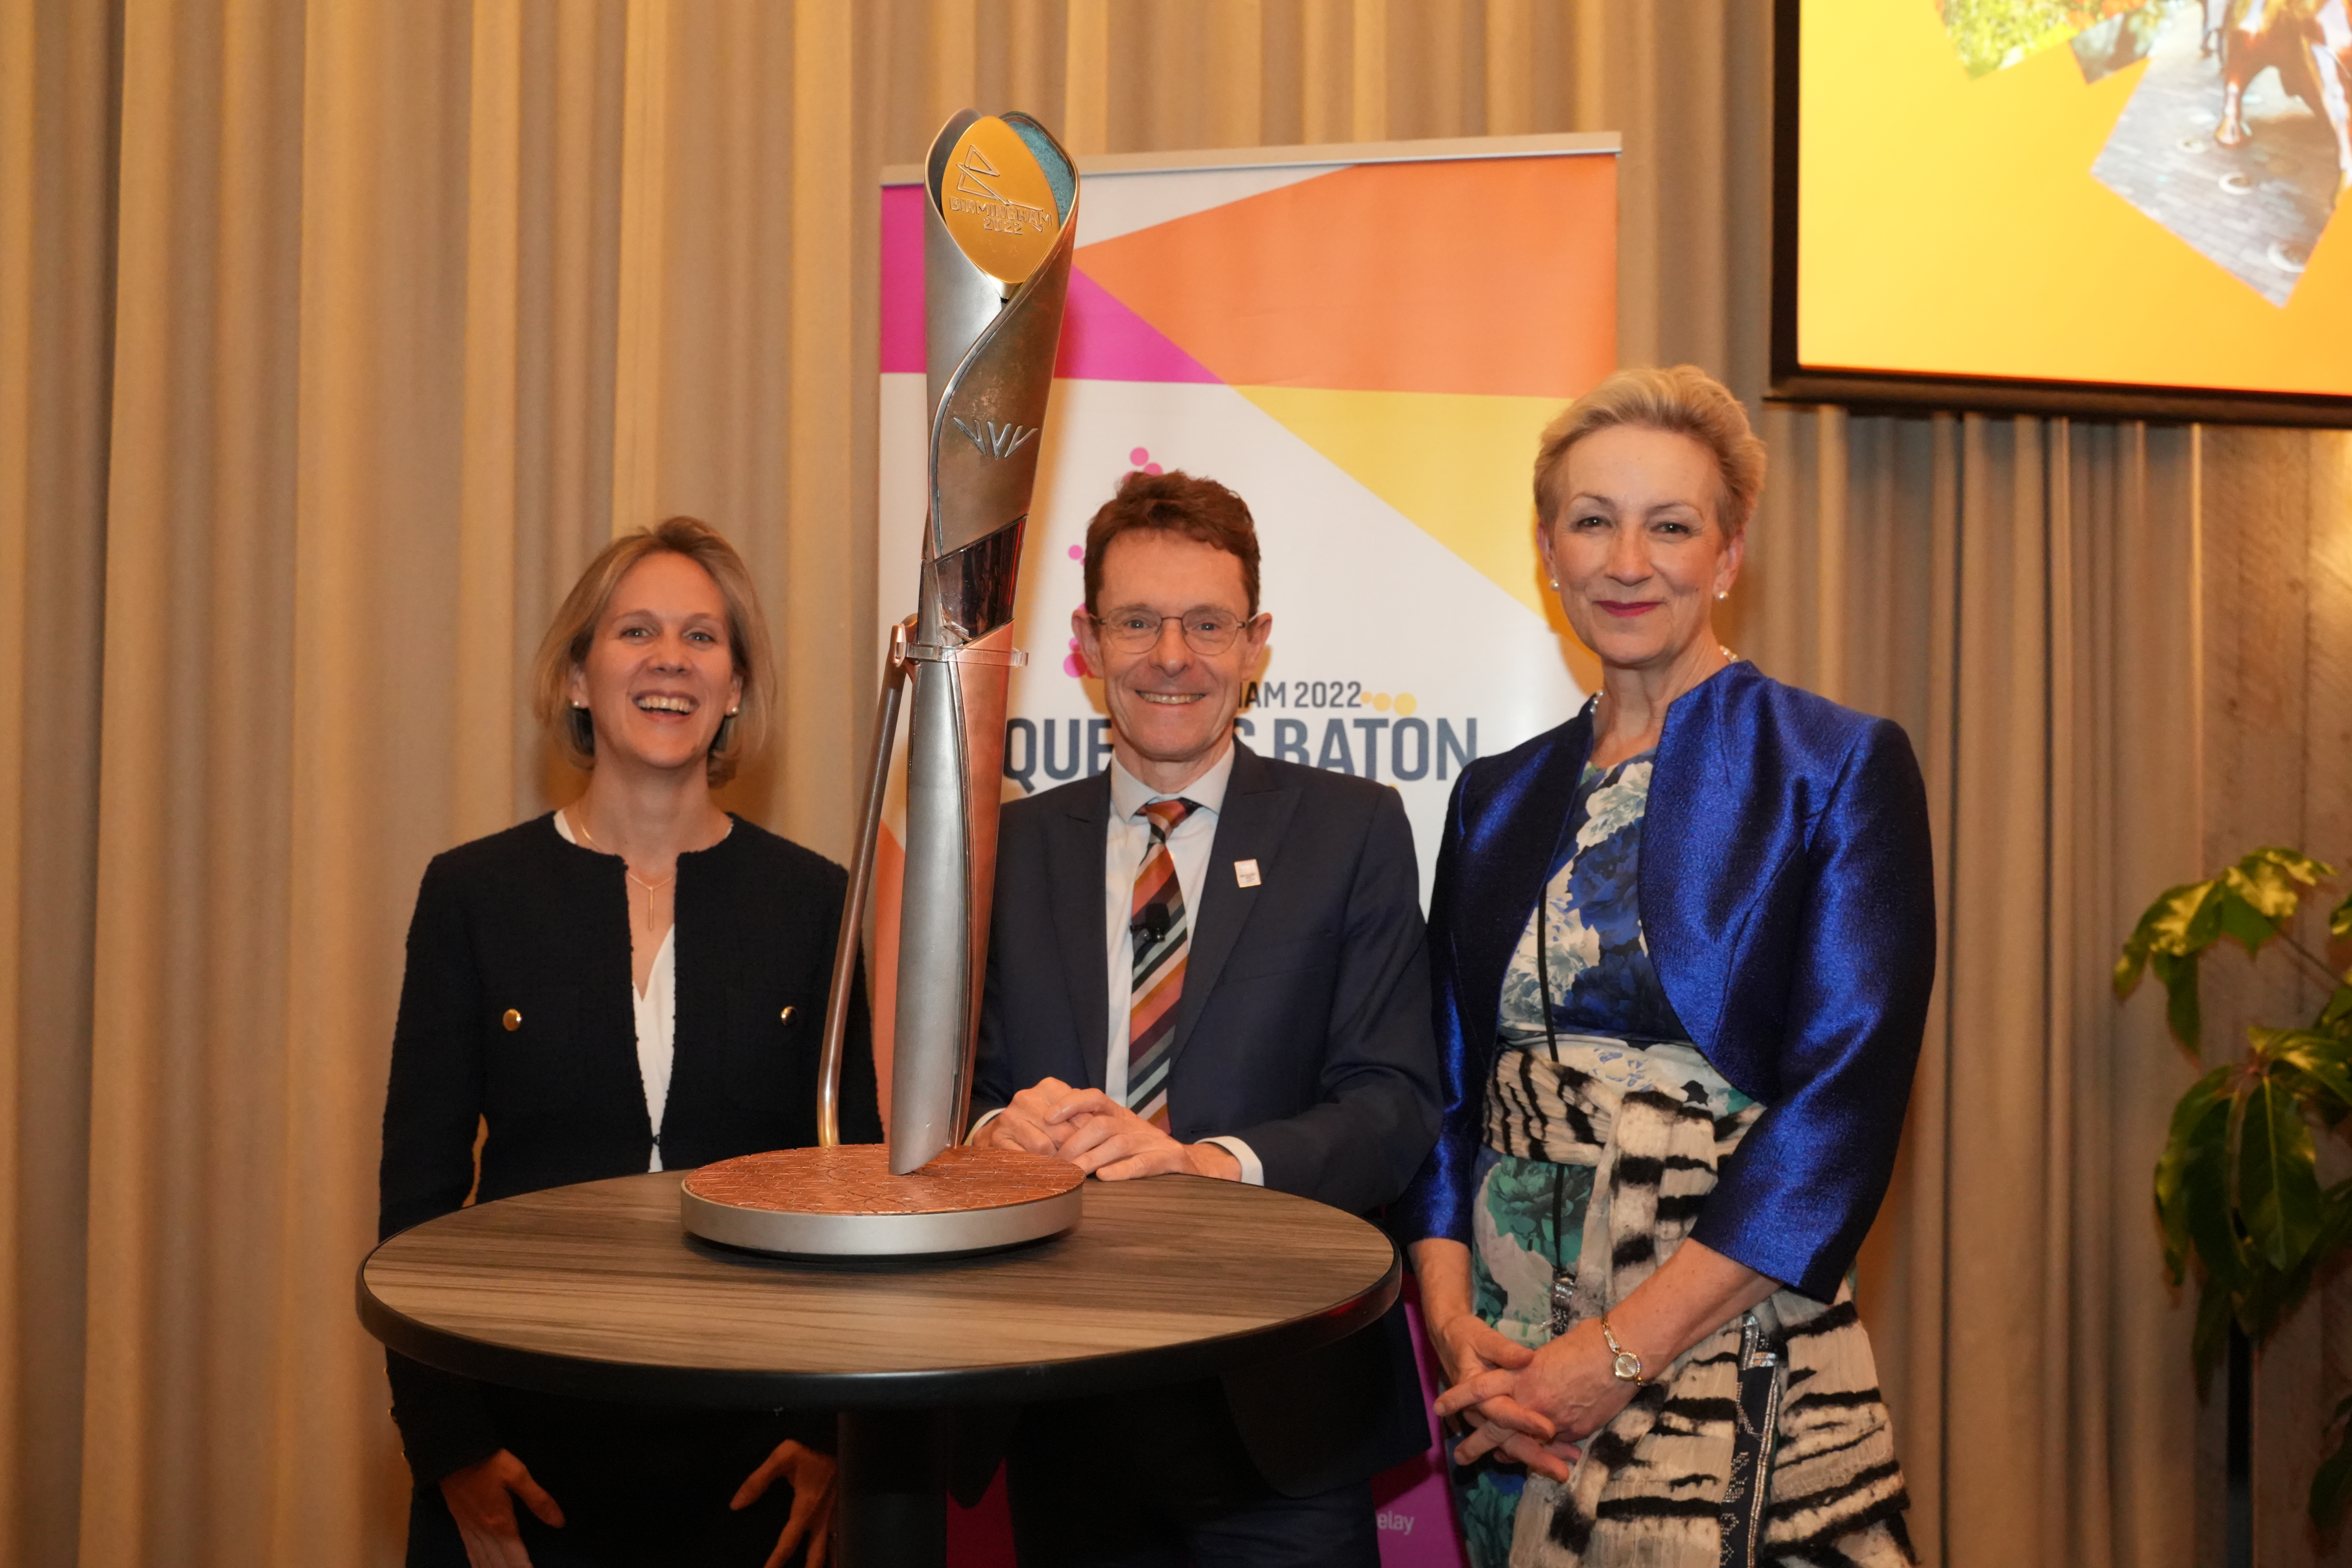 L-R: Susannah Goshko, British High Commissioner to Canada; Andy Street, the Mayor of the West Midlands and Dame Judith MacGregor, VisitBritain Chair with the Queen’s Baton at the showcase event in Toronto